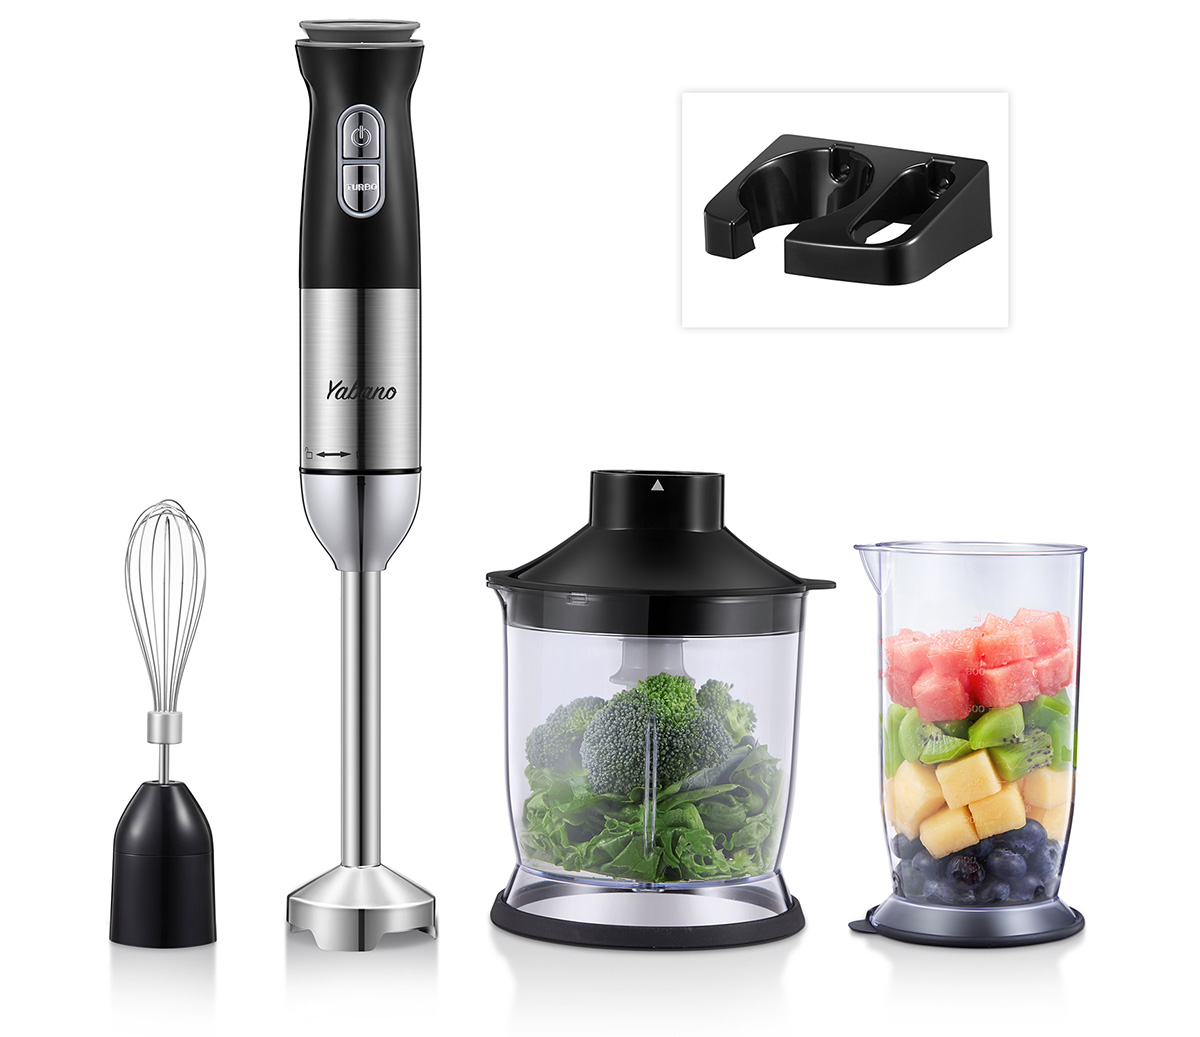 Hand Blender, Yabano Multipurpose 4 in 1 Immersion Blender with 800ml Beaker, Egg Beater and Food Chopper, 12-Speed Stick Blender, Detachable Stainless Steel Blade and Ergonomic Handle, for Baby Food, Juices, Smoothies, Sauces and Soup, BPA Free